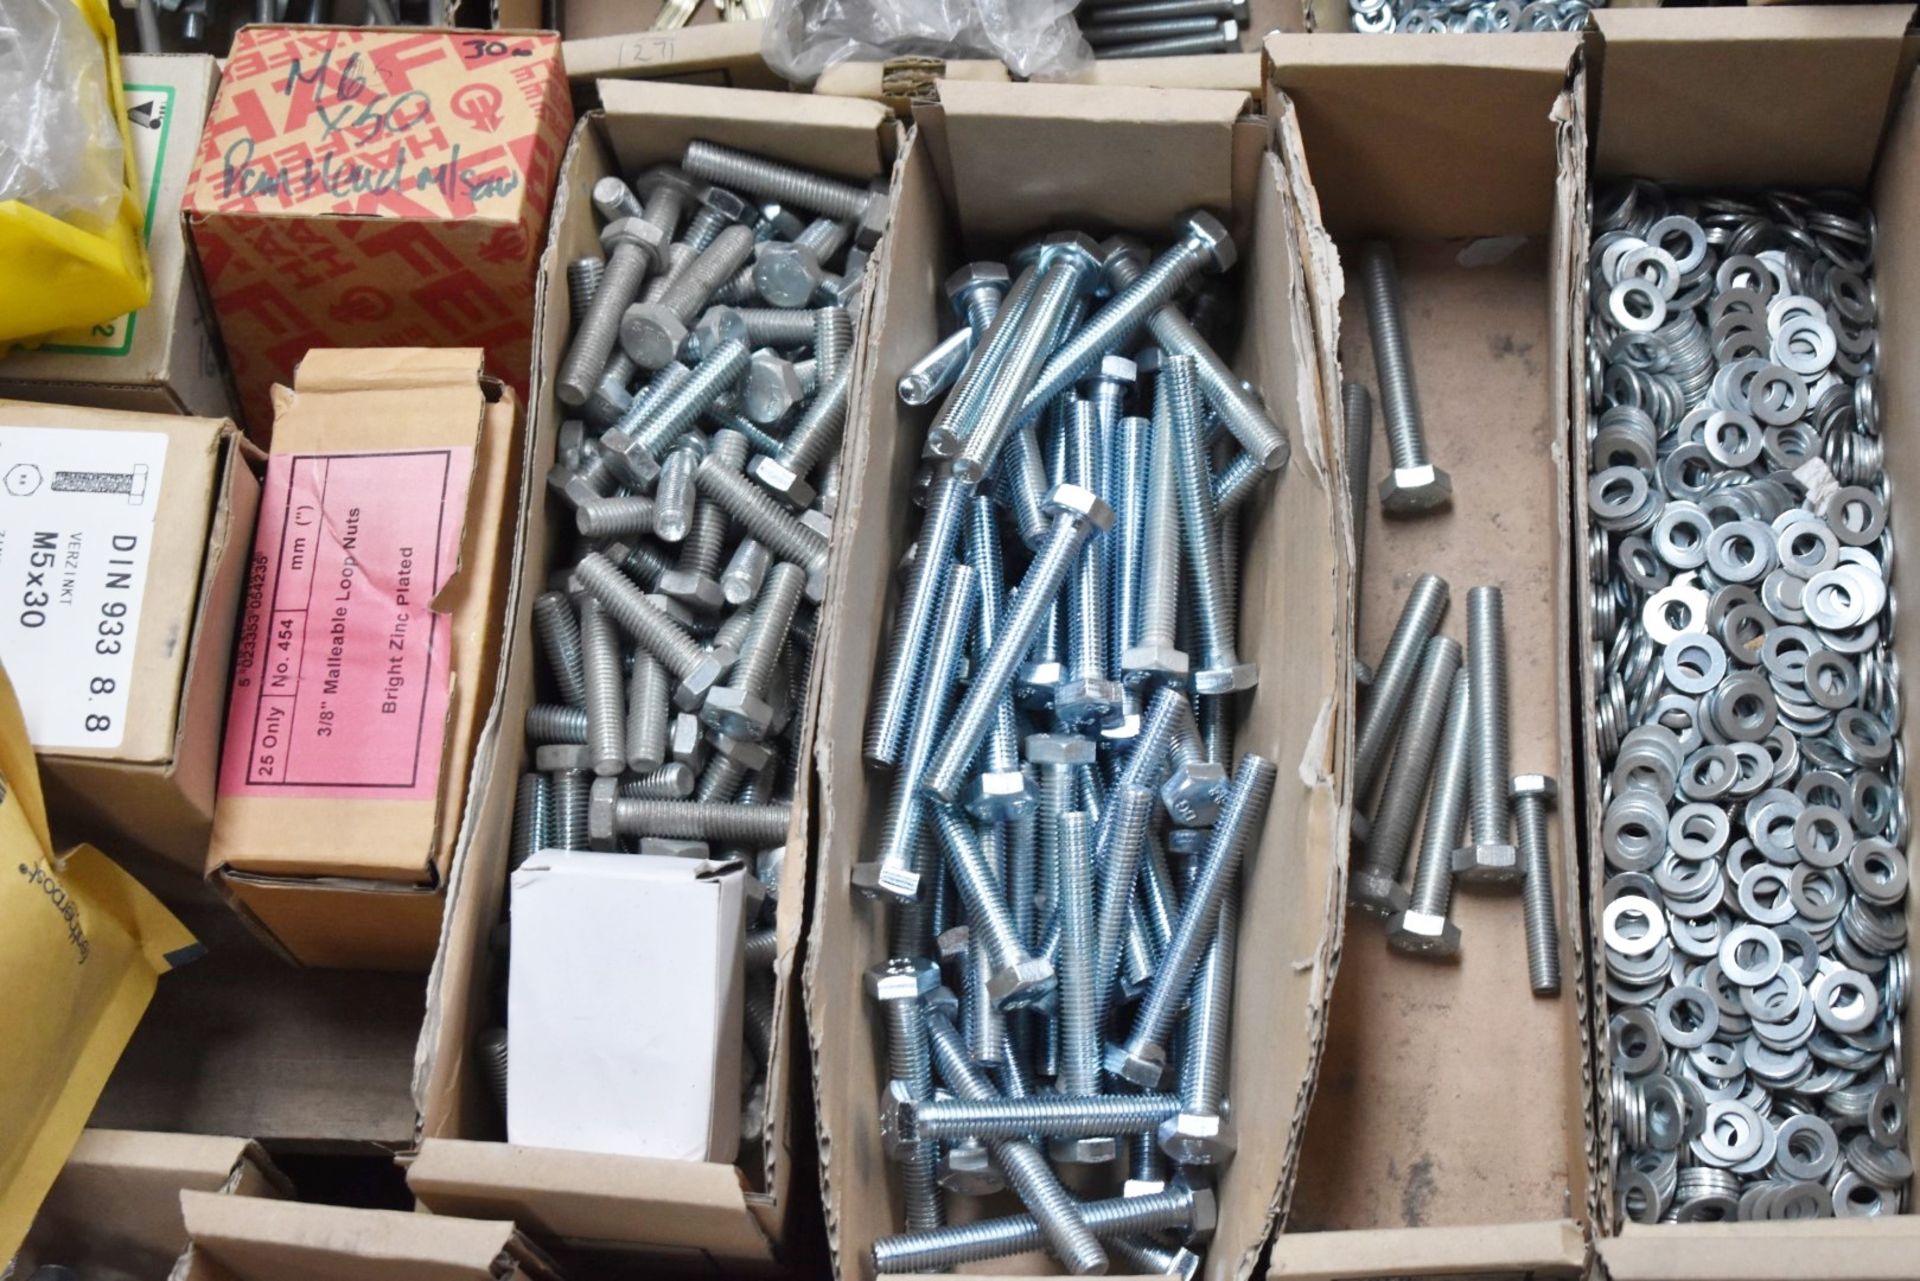 1 x Assorted Ironmongery Pallet Lot - Features Nuts, Bolts, Keys, Locks, Washers, Screws, D - Image 23 of 32